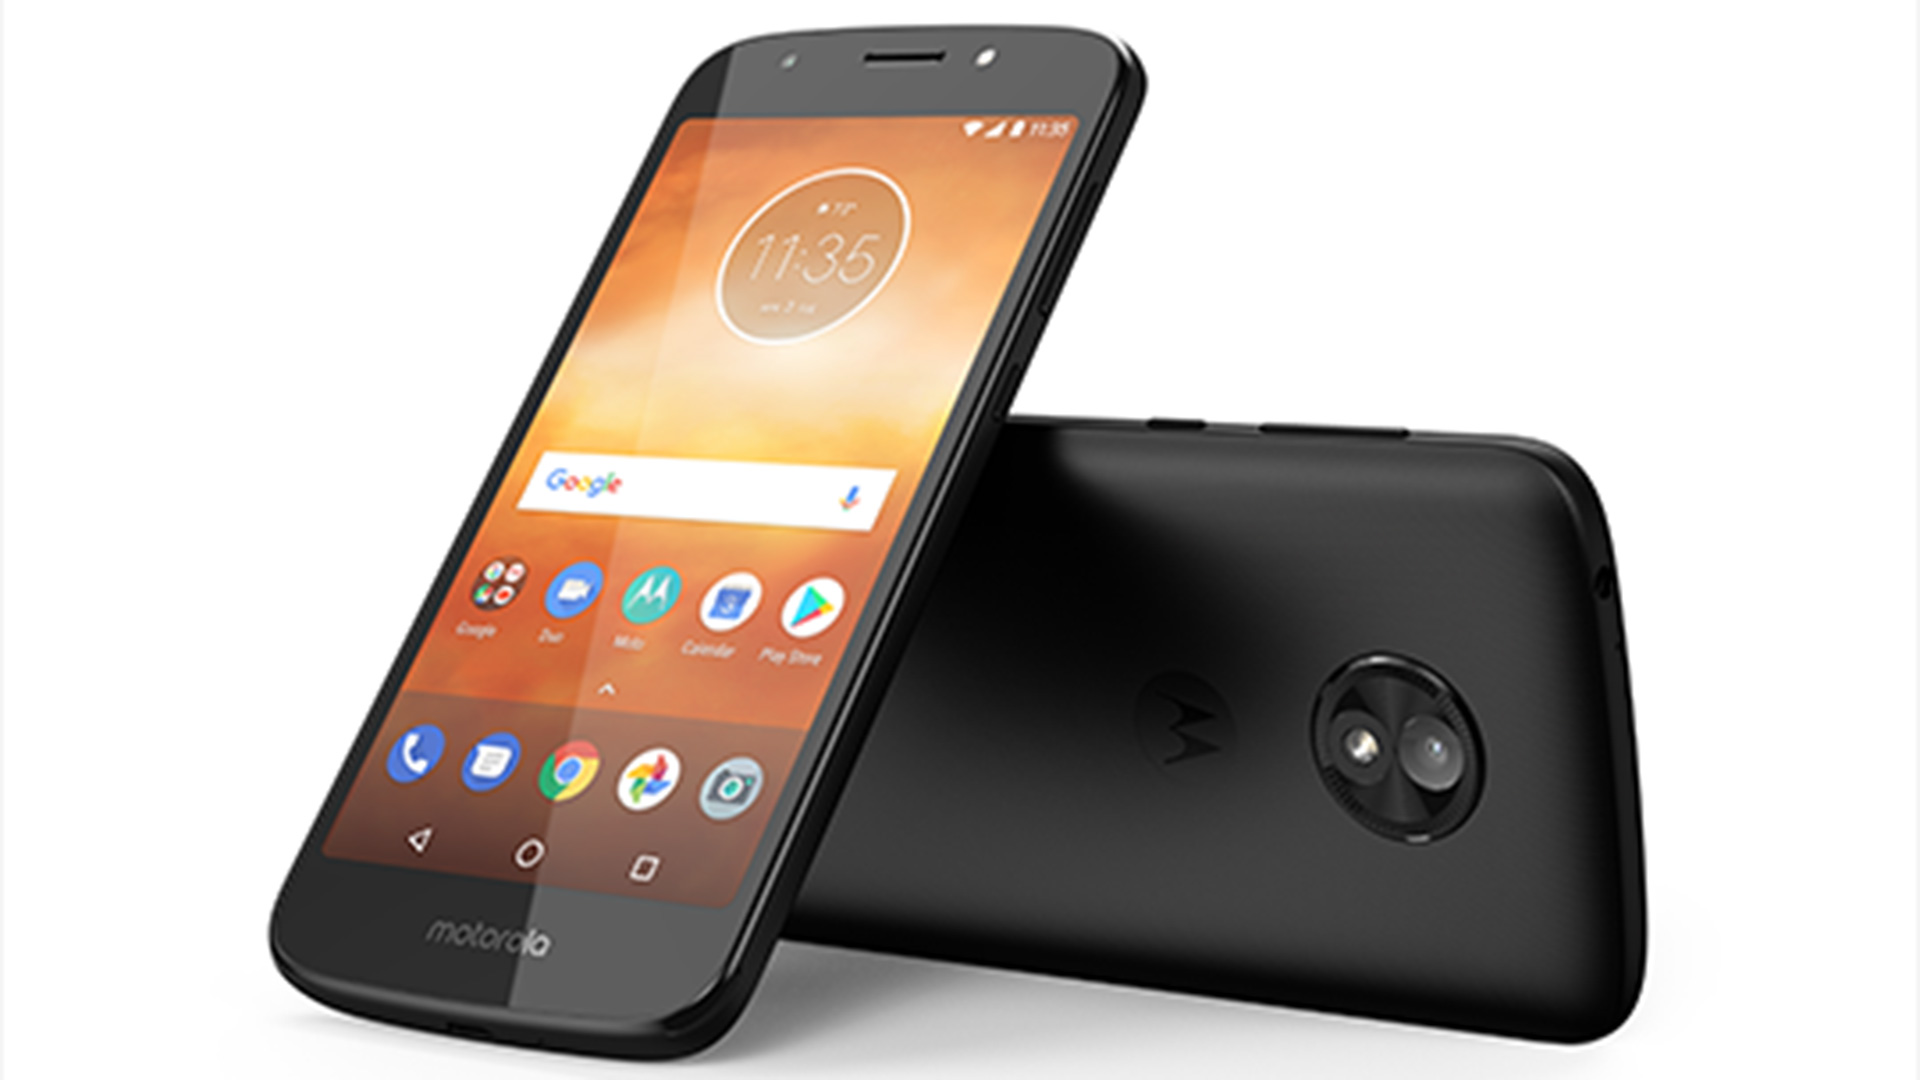 Better late than never? Moto G4 Plus gets Android 8.1 Oreo update : r/MotoG